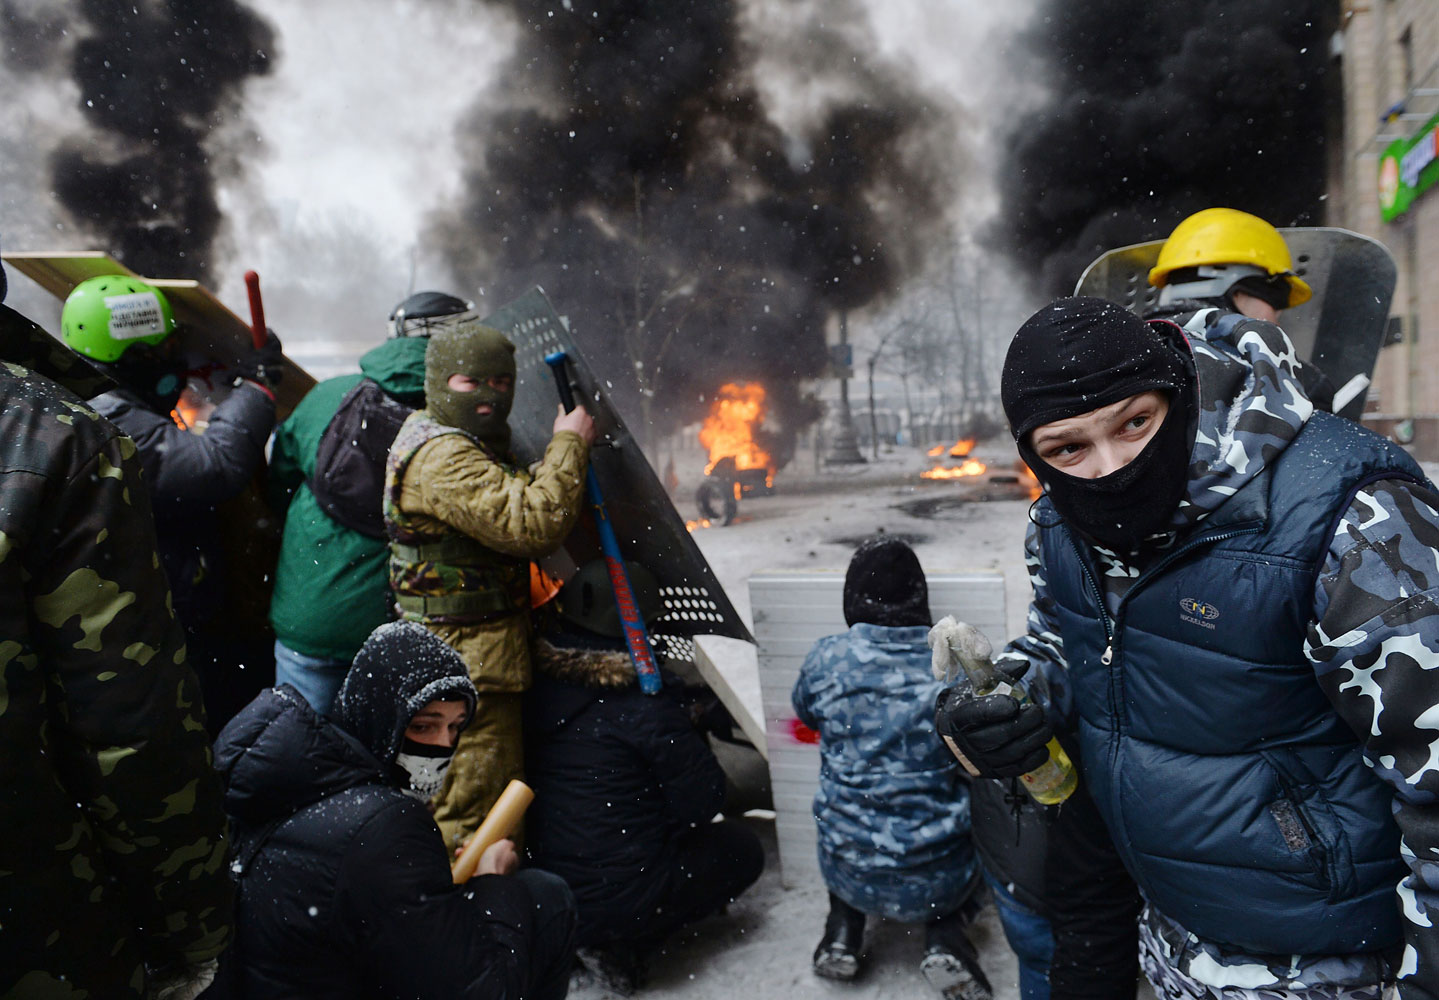 A demonstrator holds an incendiary device as protesters clash with police in the center of Kiev,  Jan. 22, 2014.